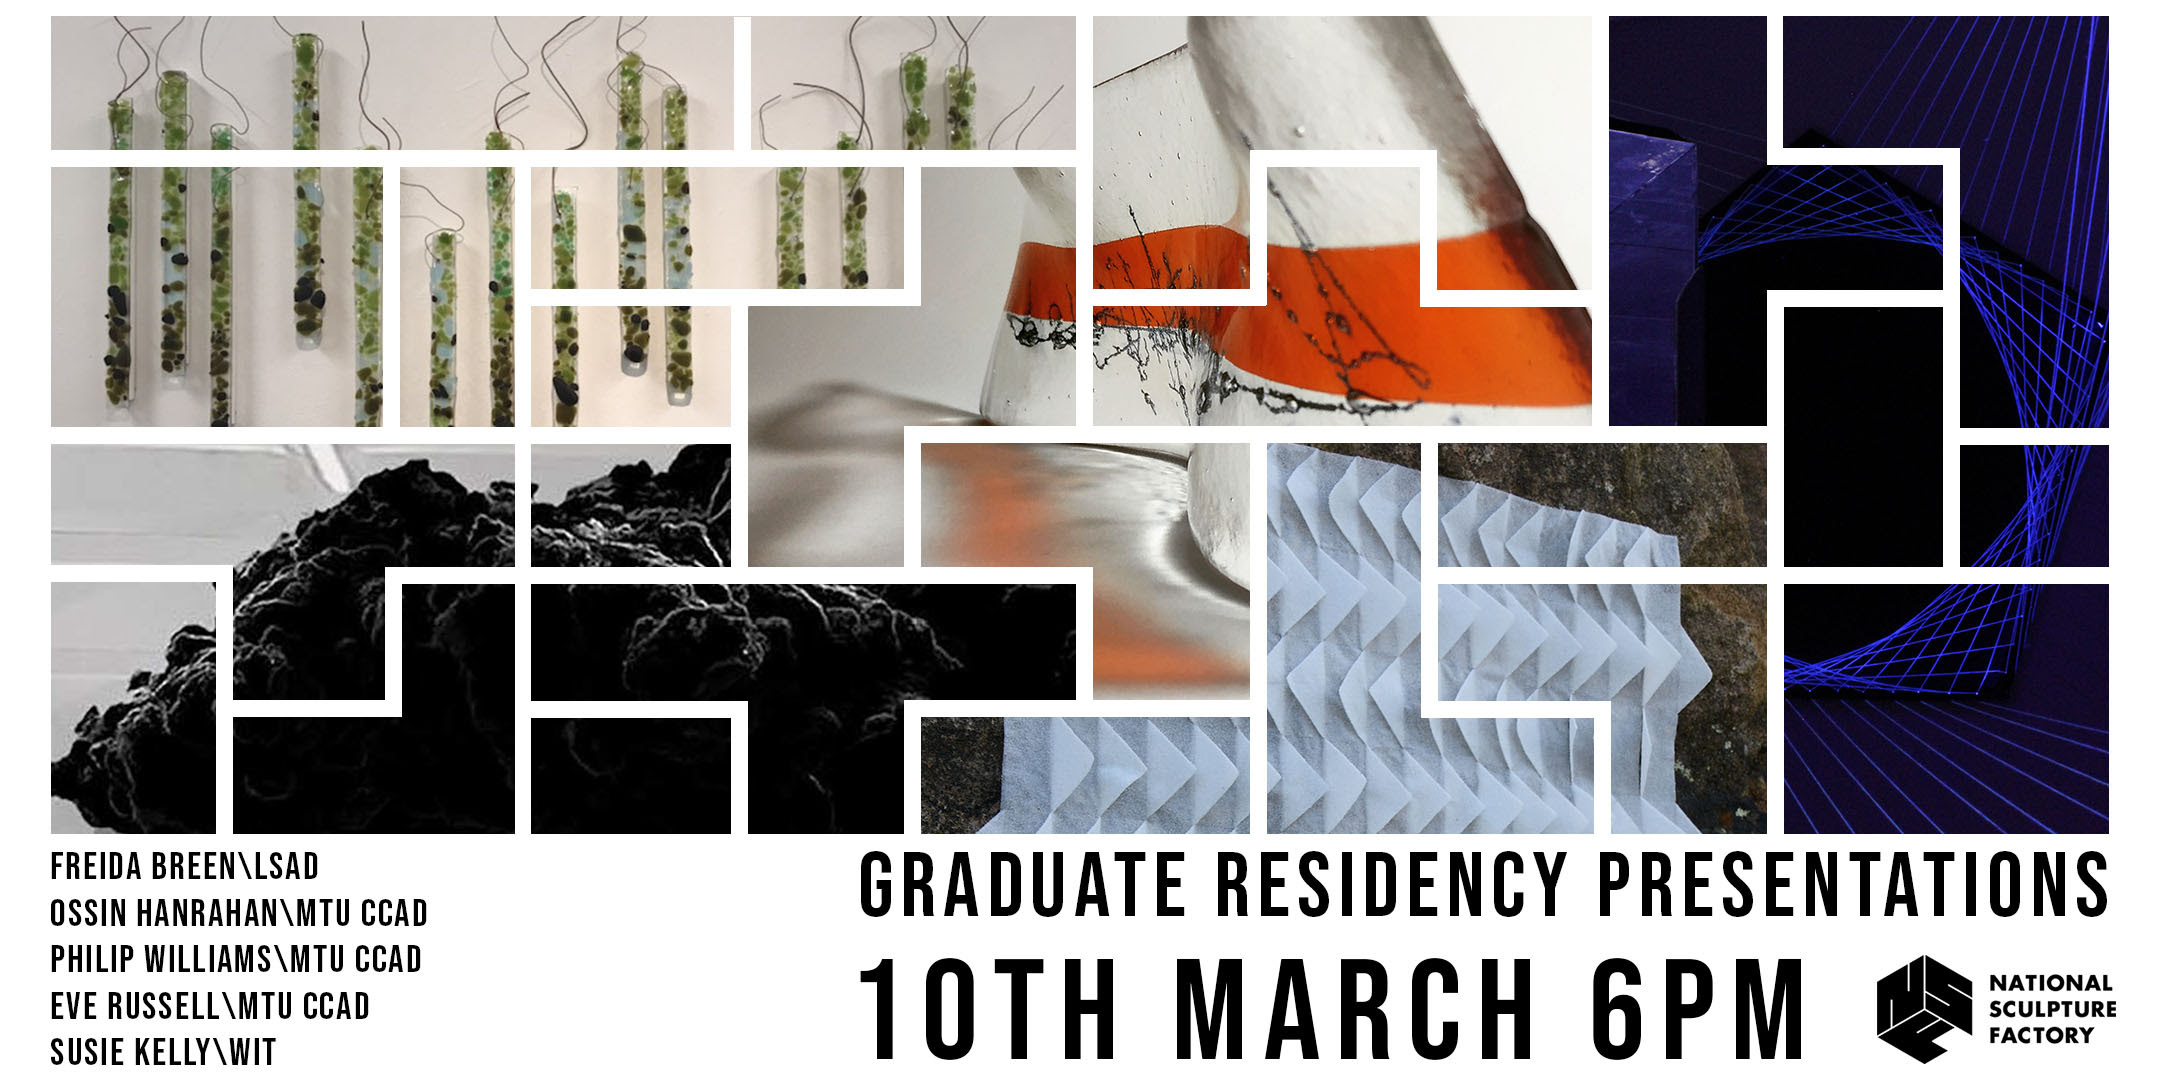 Graduate Residency Presentations 2021 - A collage of multiple artworks including colourful abstract glass objects, triangular white folded paper pattern, a dark storm cloud and dark blue geometric laser pattern National Sculpture Factory Graduate Residency Presentations 10th March 6PM